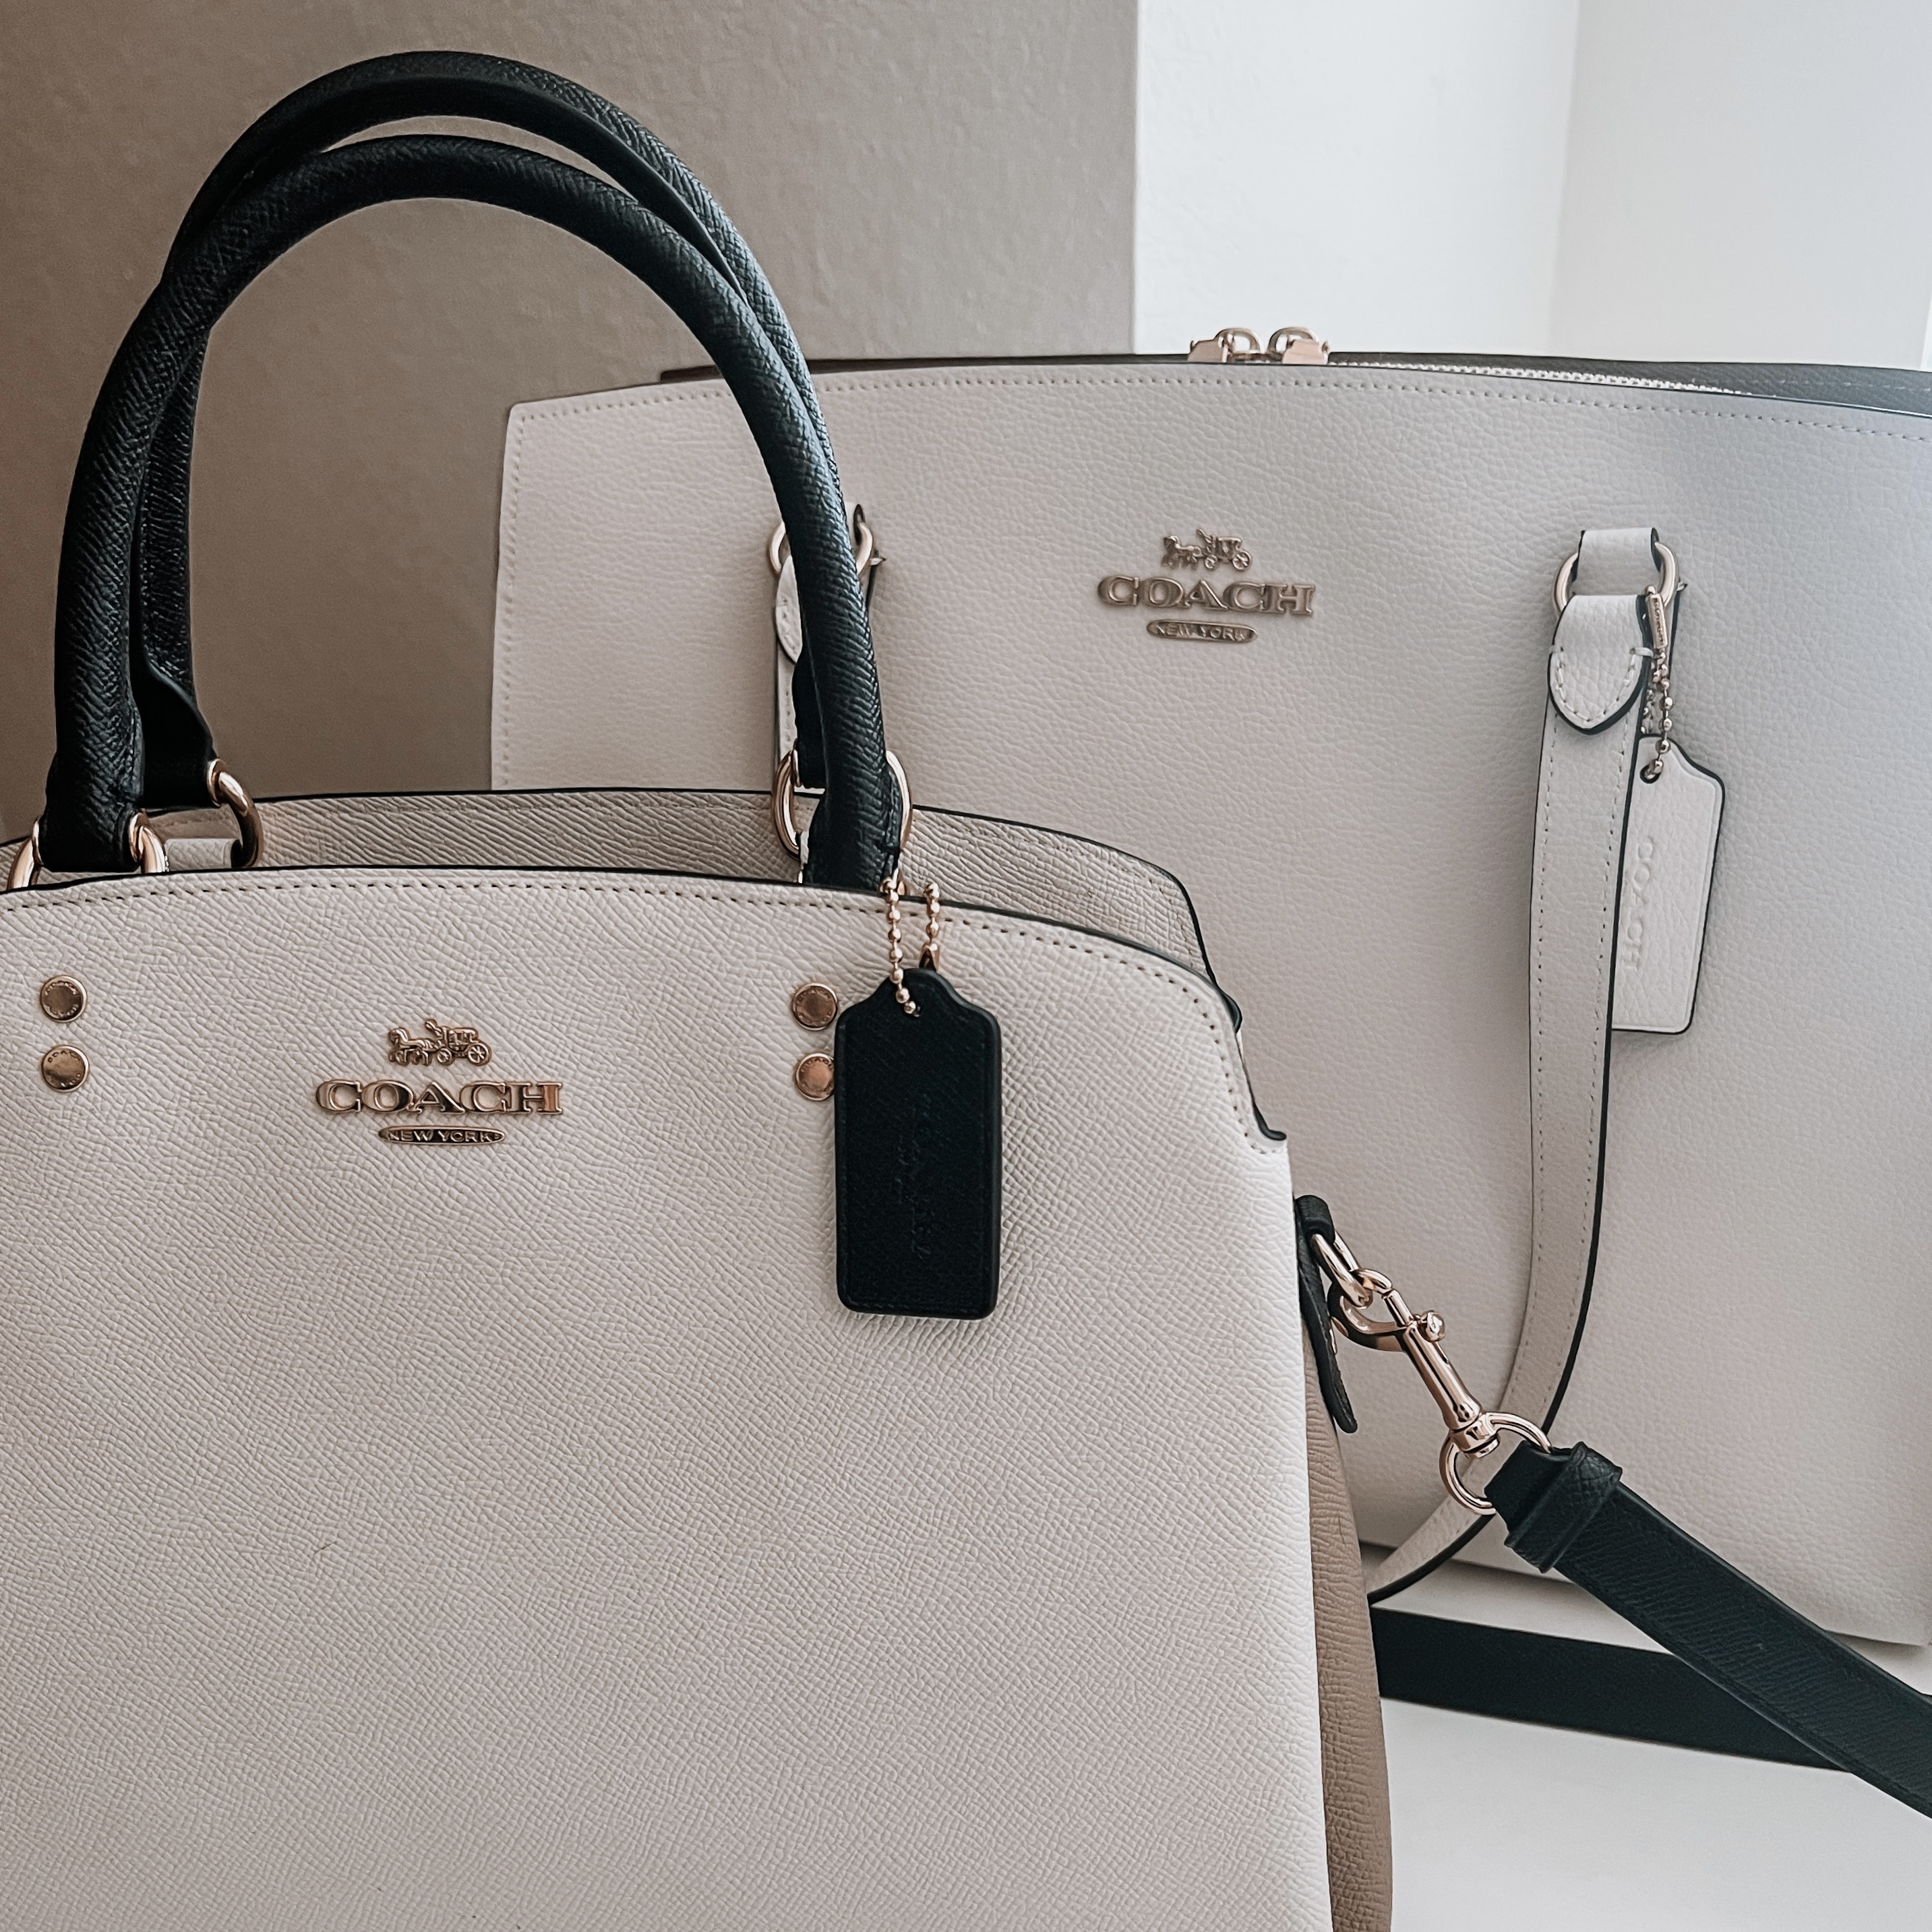 January  Finds - The Lillie Bag